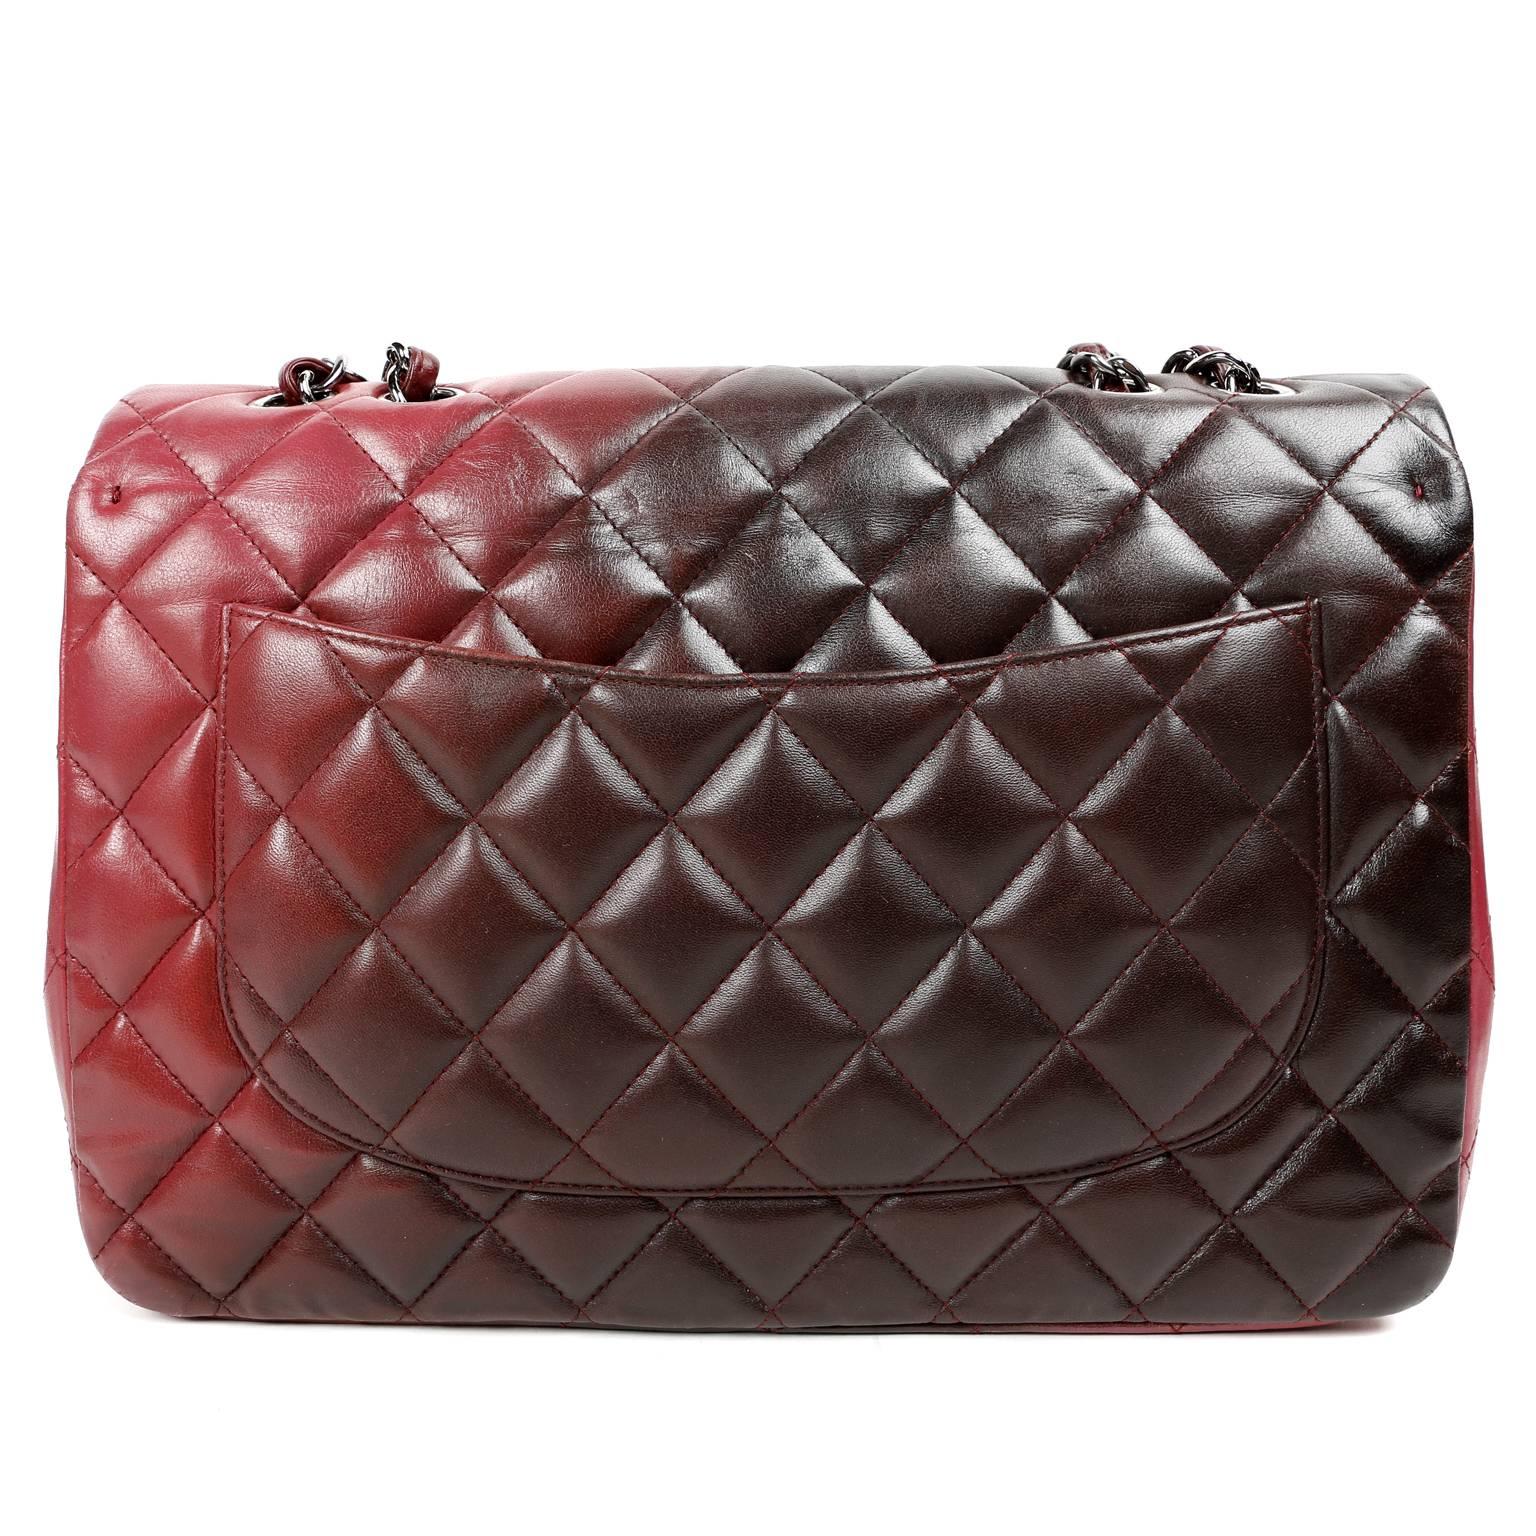 Chanel Bordeaux Degrade Jumbo Classic Flap- PRISTINE
  The beautifully unique coloration sets this classic apart and is a must have for collectors.  

Bordeaux leather is quilted in signature Chanel diamond stitched pattern.  A color progression